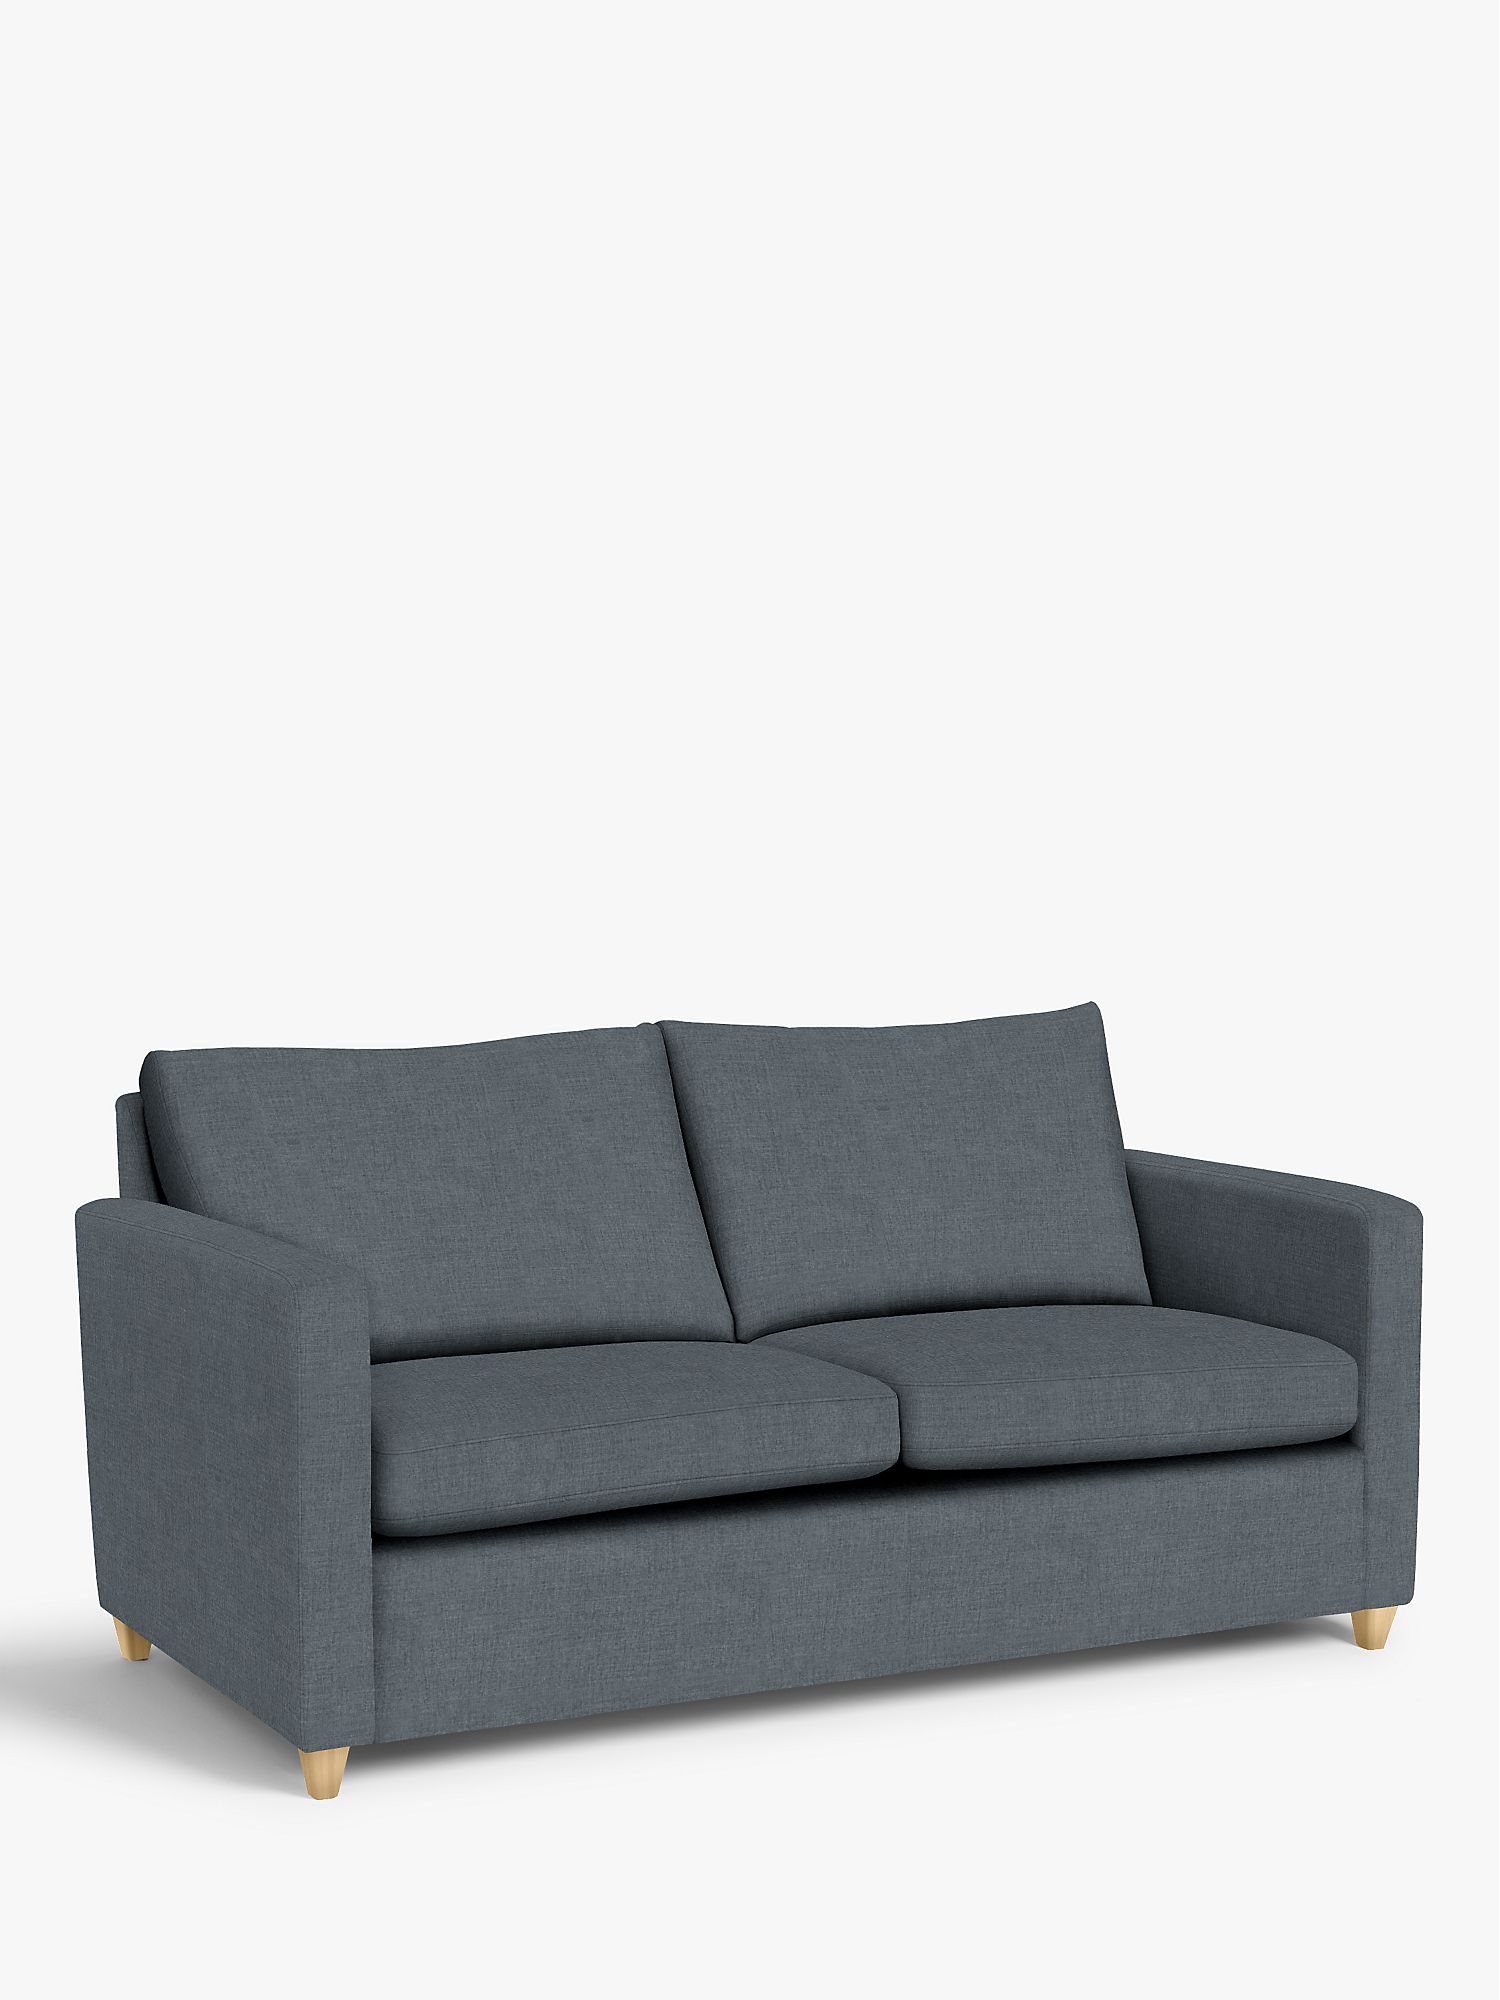 Single Sofa Beds For Small Rooms John Lewis Partners